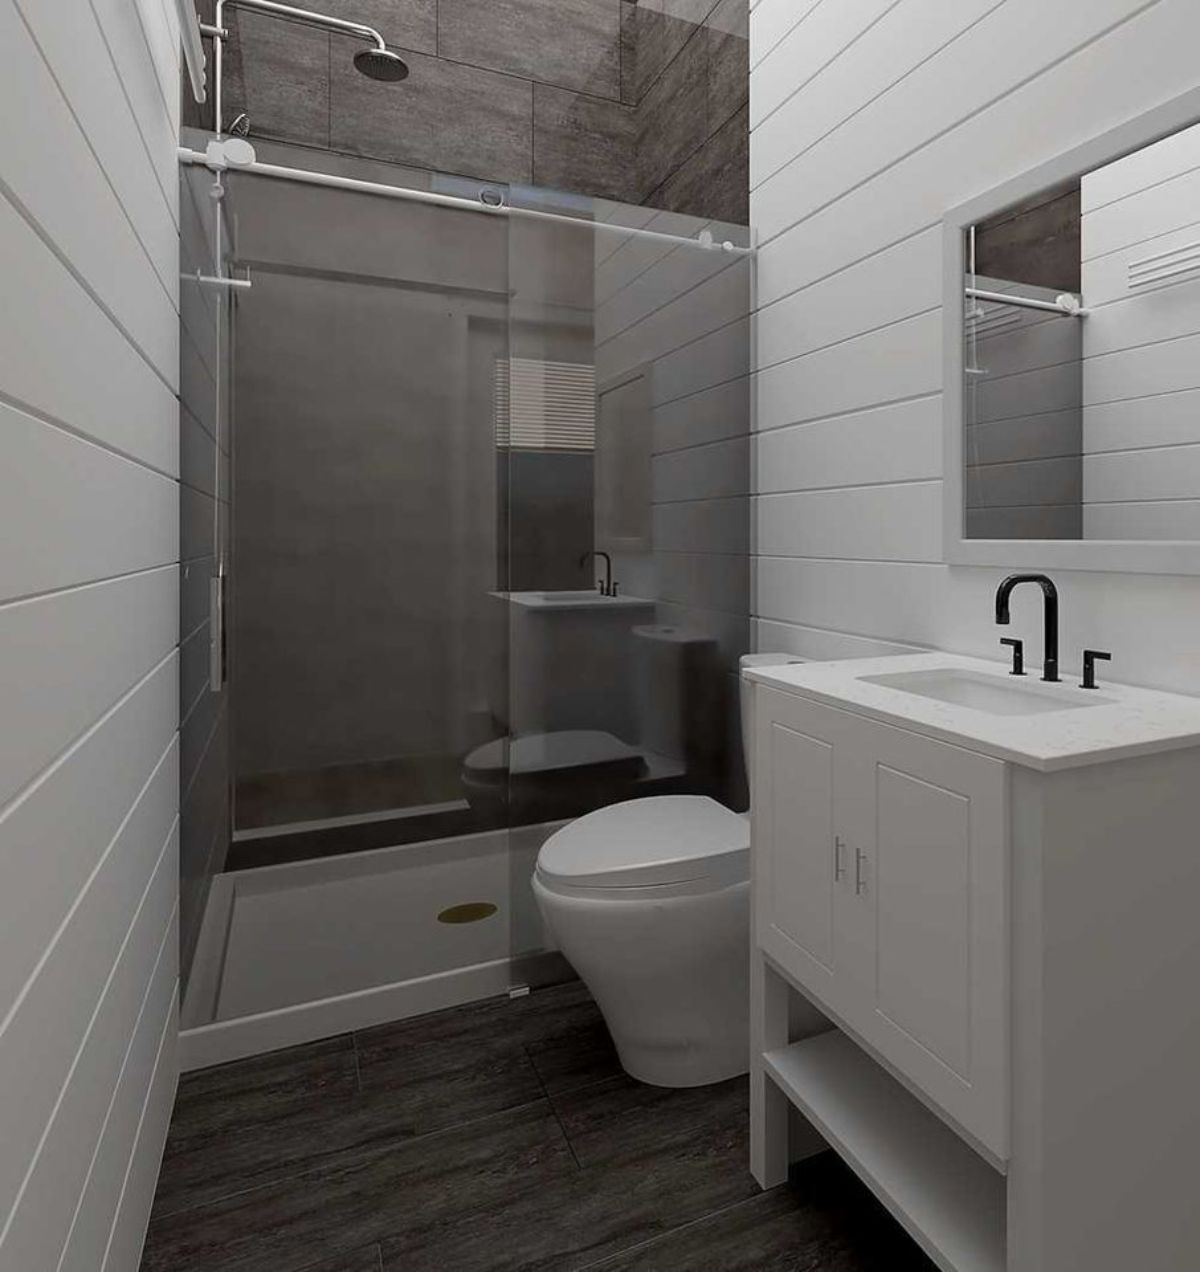 bathroom of tiny house has standard fittings with separate shower area and glass enclosure